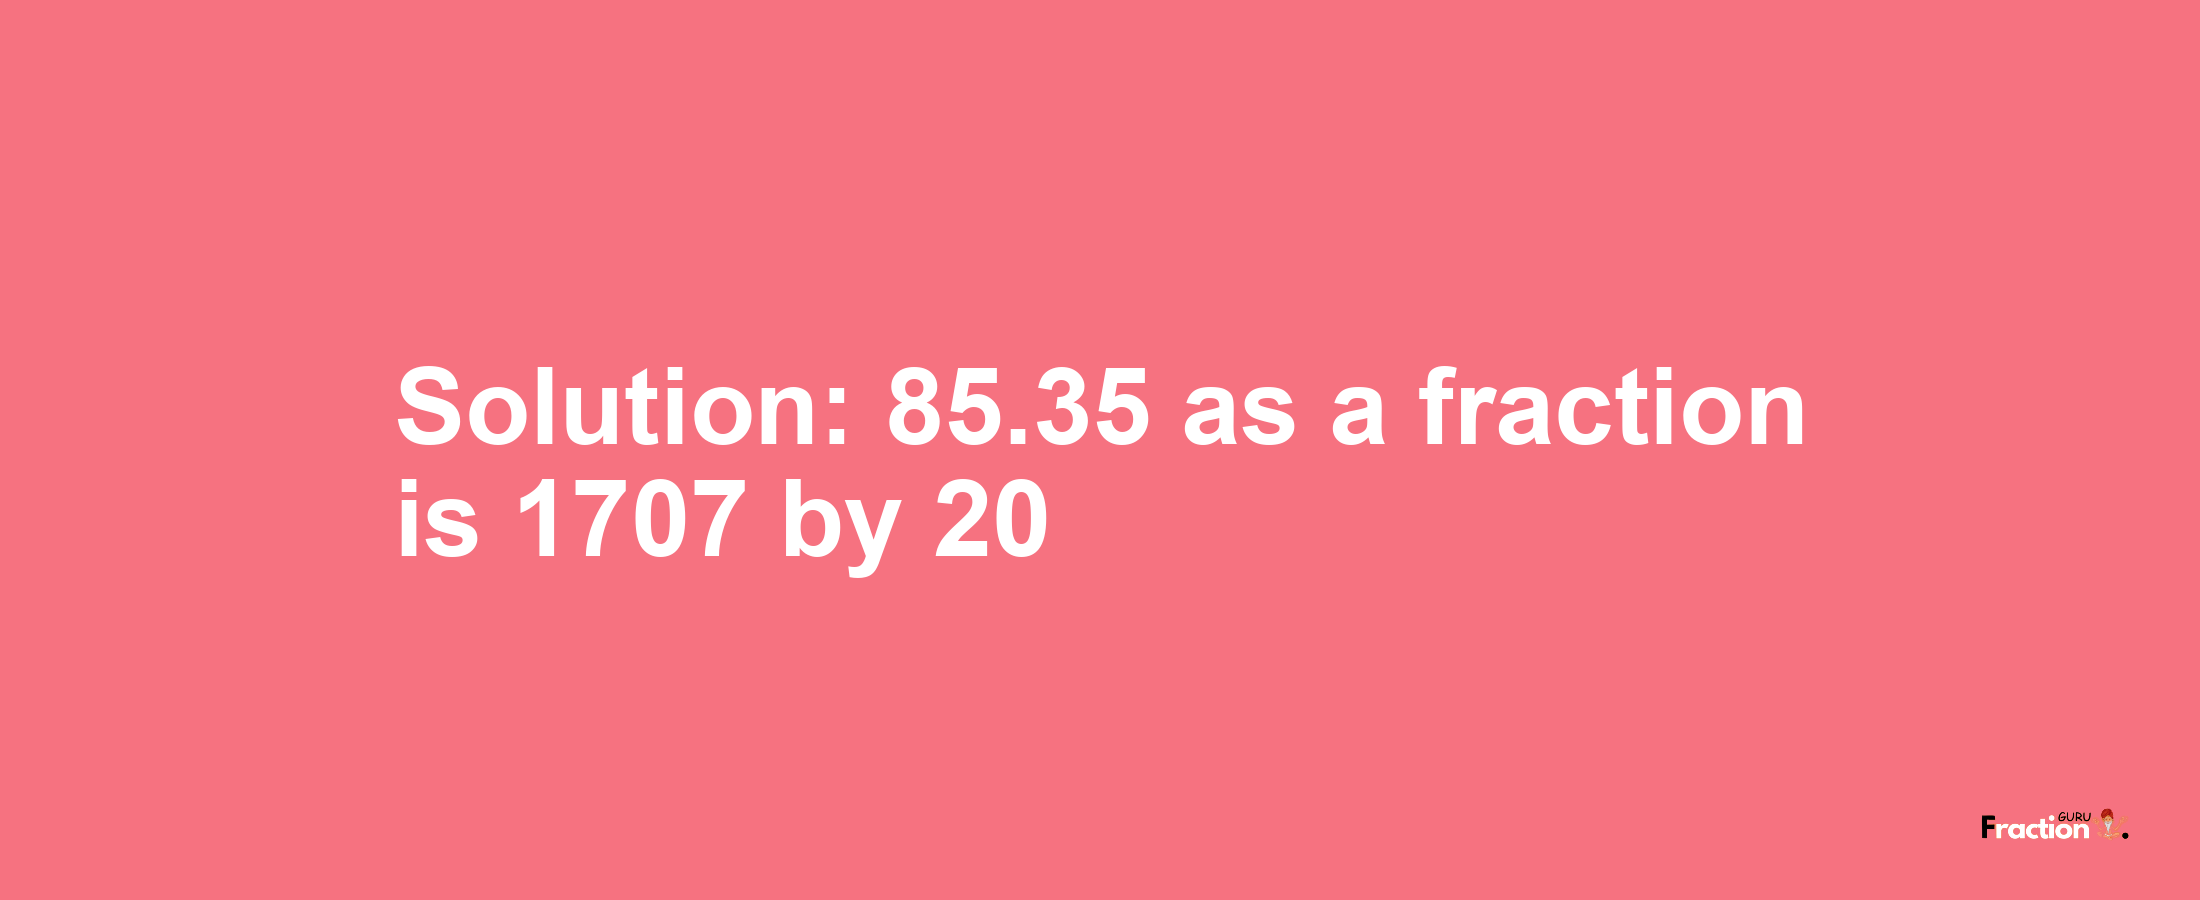 Solution:85.35 as a fraction is 1707/20